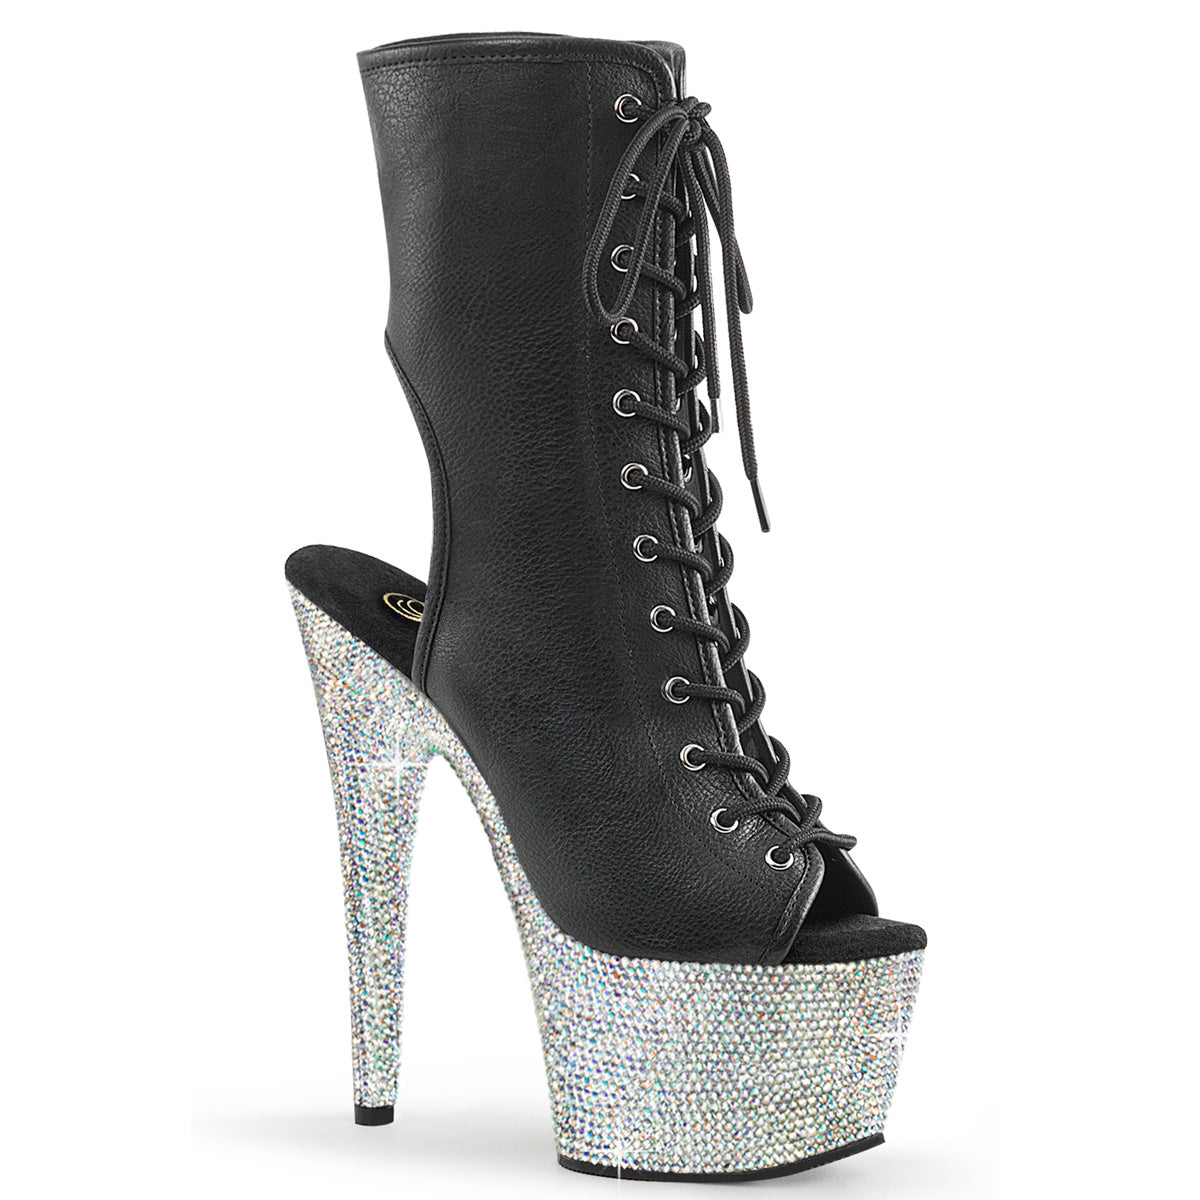 BEJEWELED-1016-7 Strippers Heels Pleaser Platforms (Exotic Dancing) Blk Faux Leather/Slv AB RS